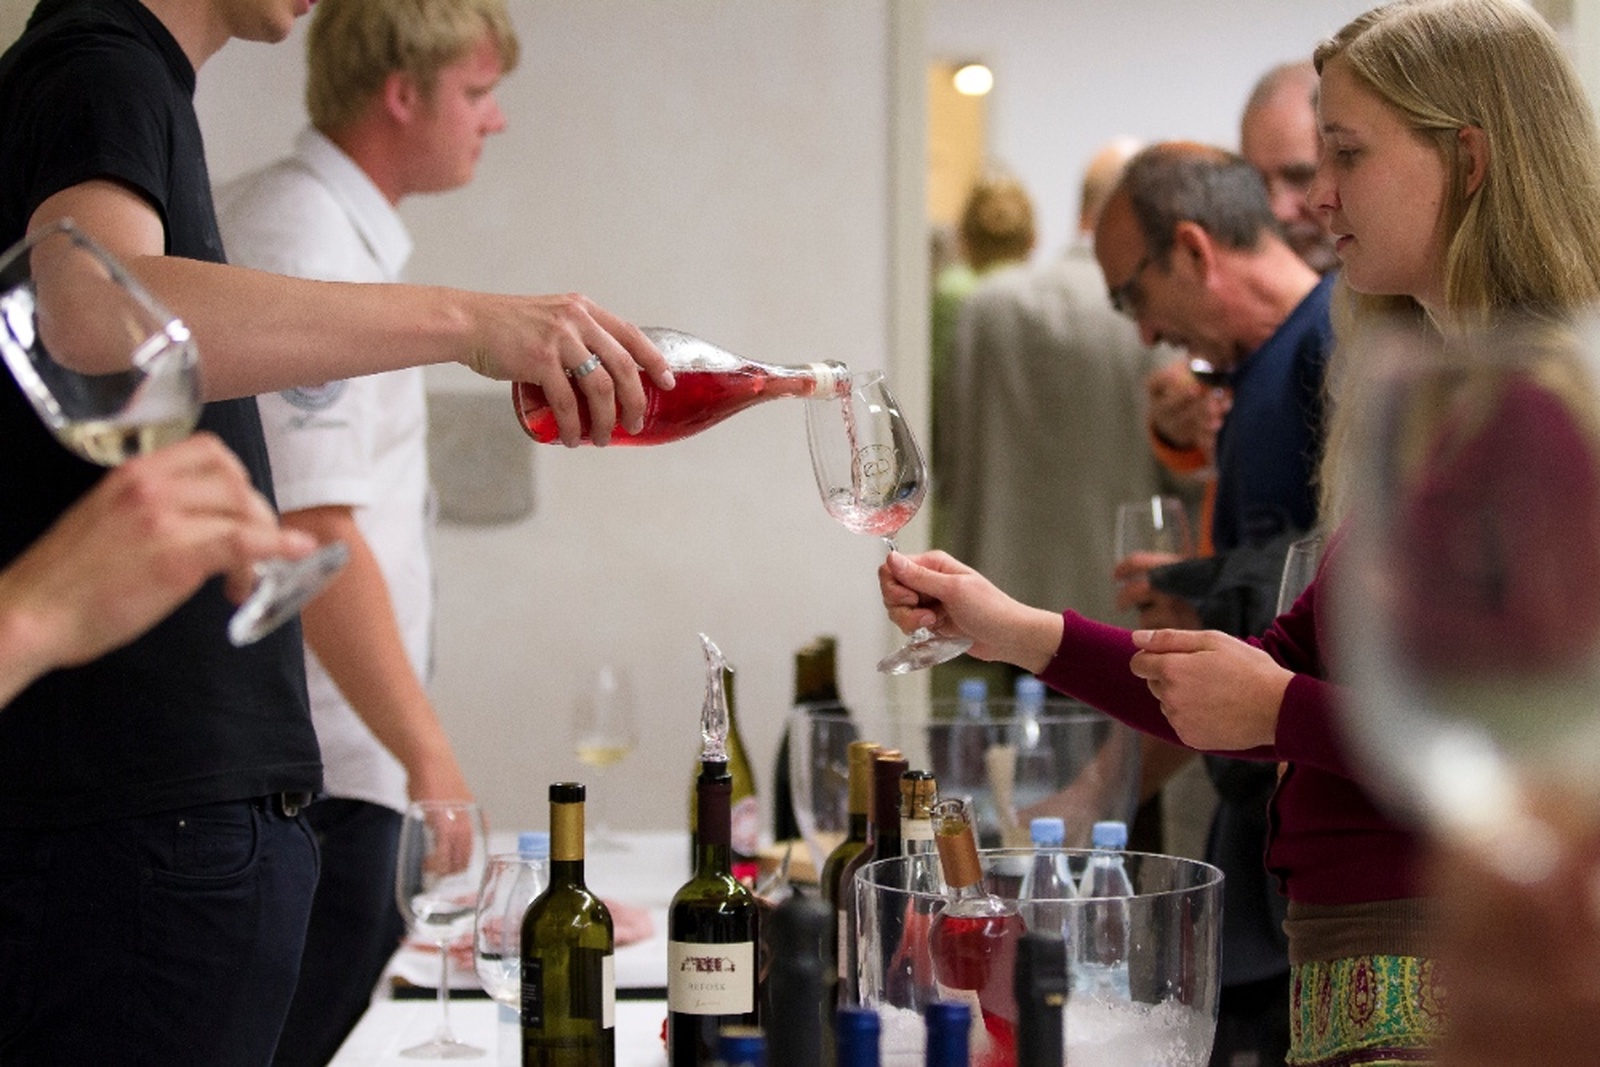 Student Wine Festival of the School of Viticulture and Enology of the University of Nova Gorica